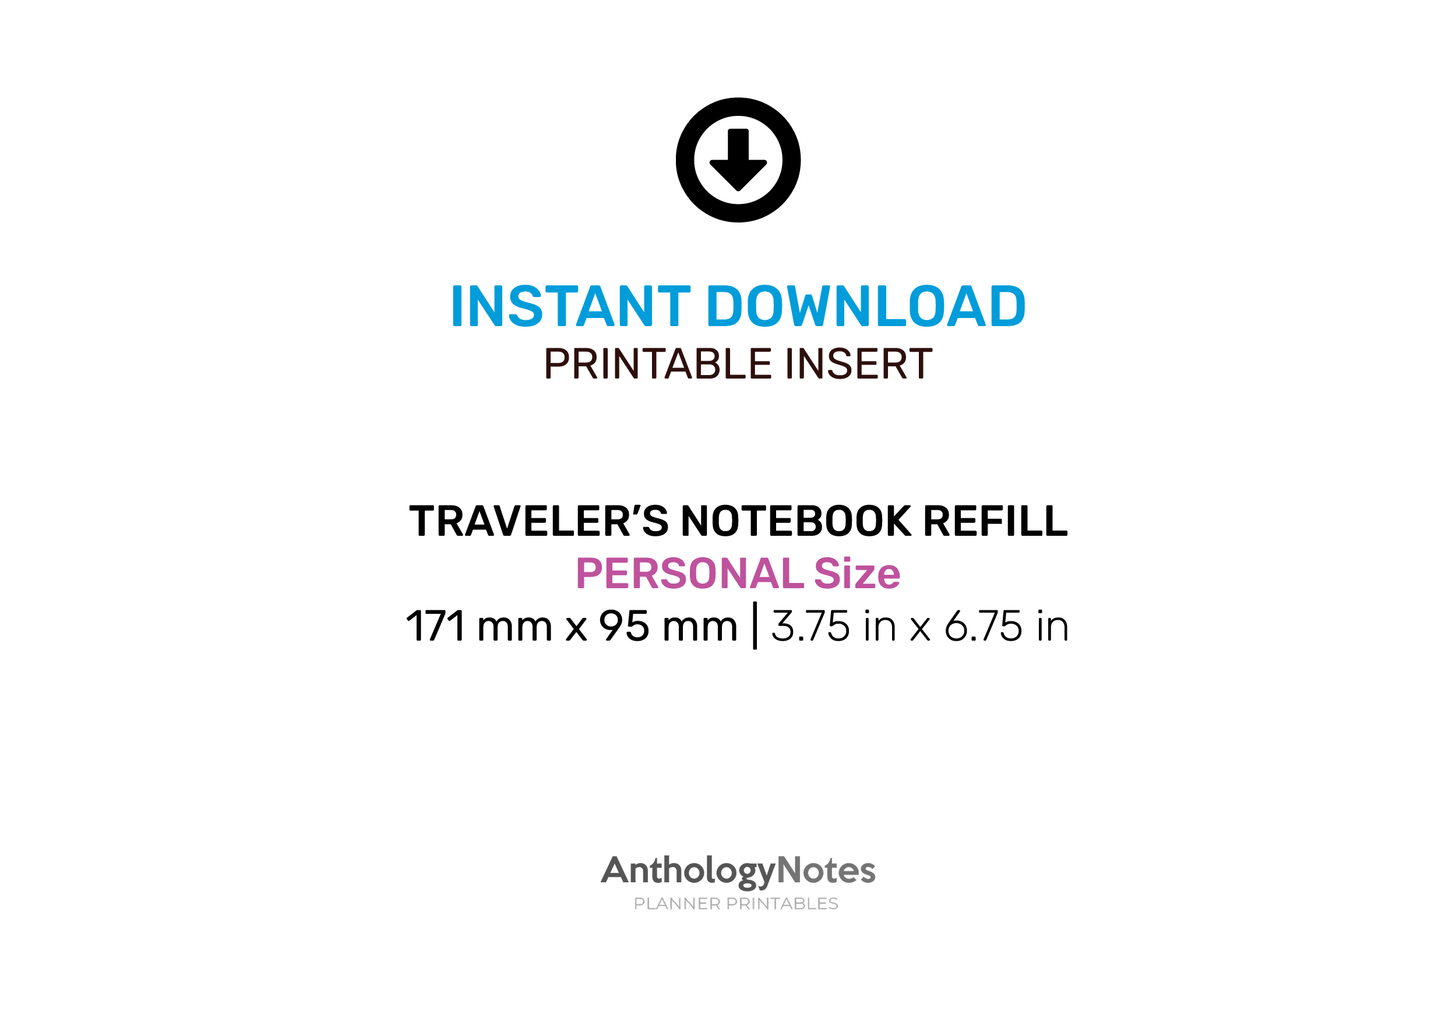 TN Personal READING Journal  Book Review Printable Refill Insert for Traveler's Notebook | PER22-015